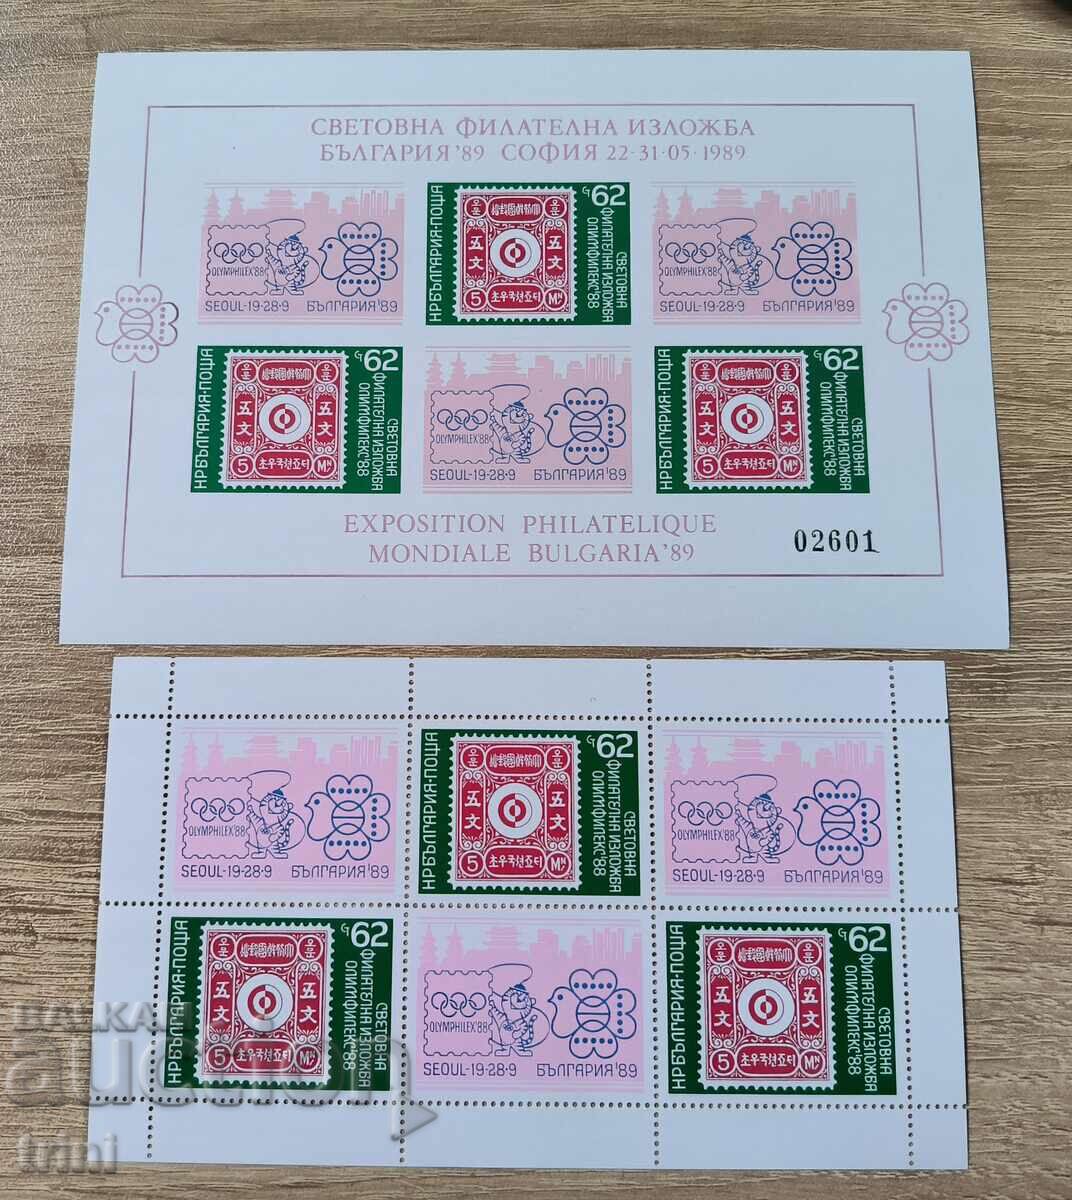 World Philatelic Exhibition Bulgaria 1989 with and without number